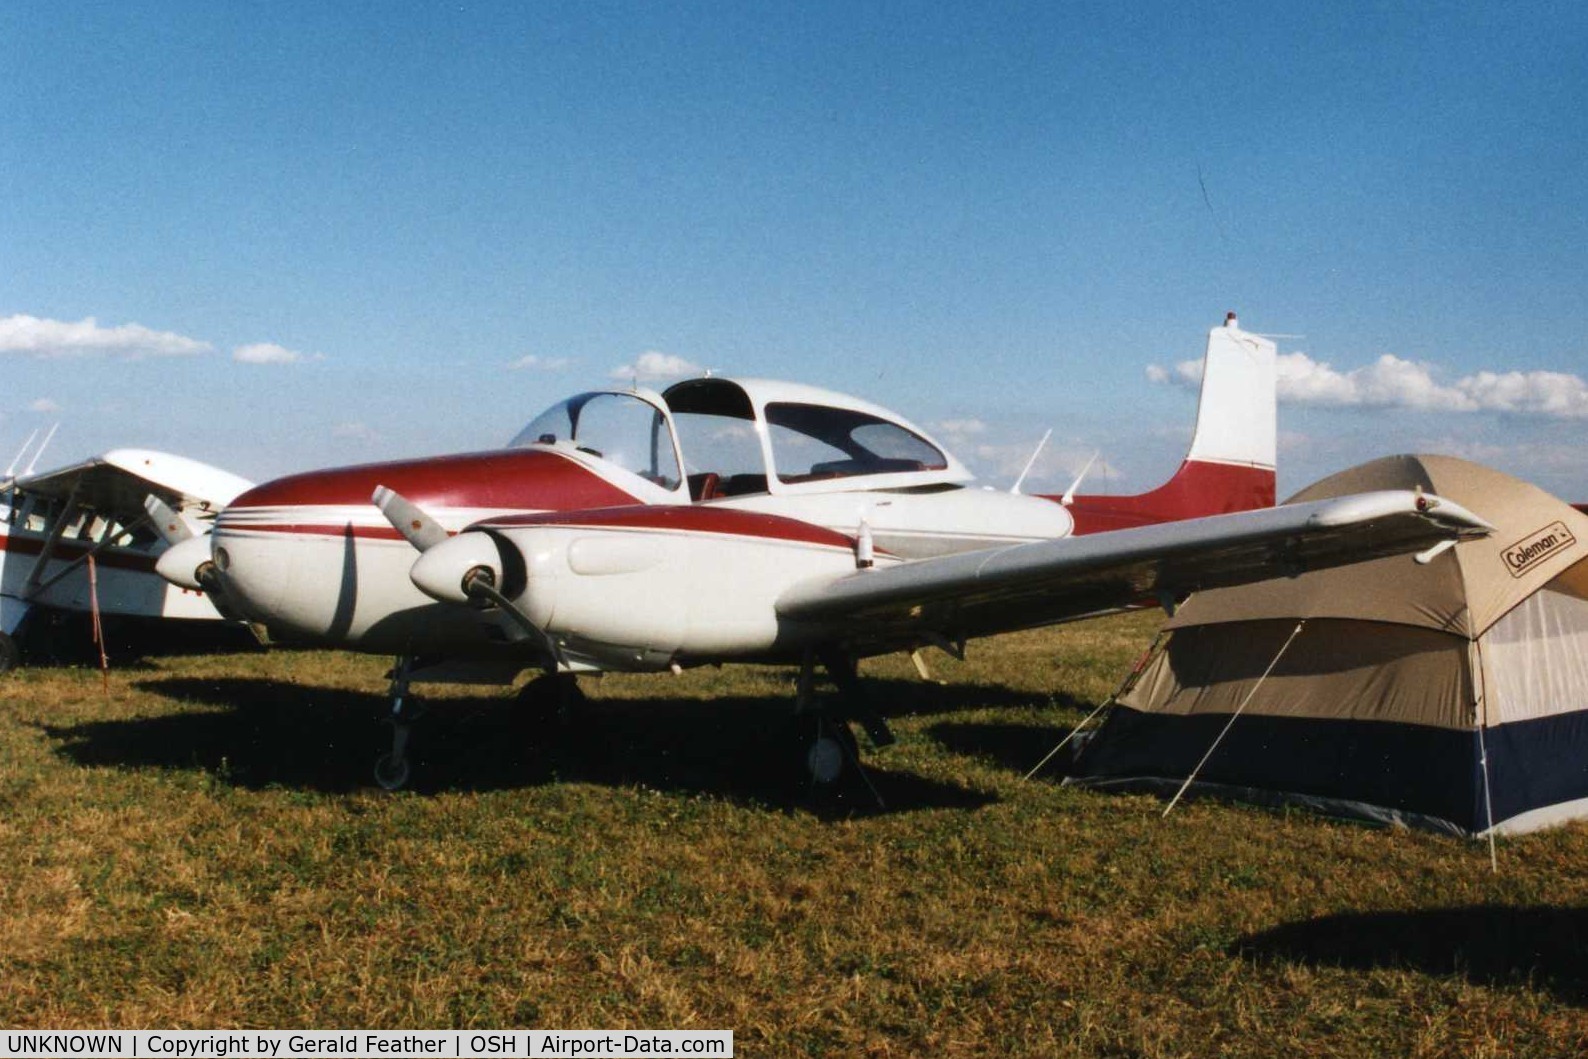 UNKNOWN, , Can you identify this Twin Navion?